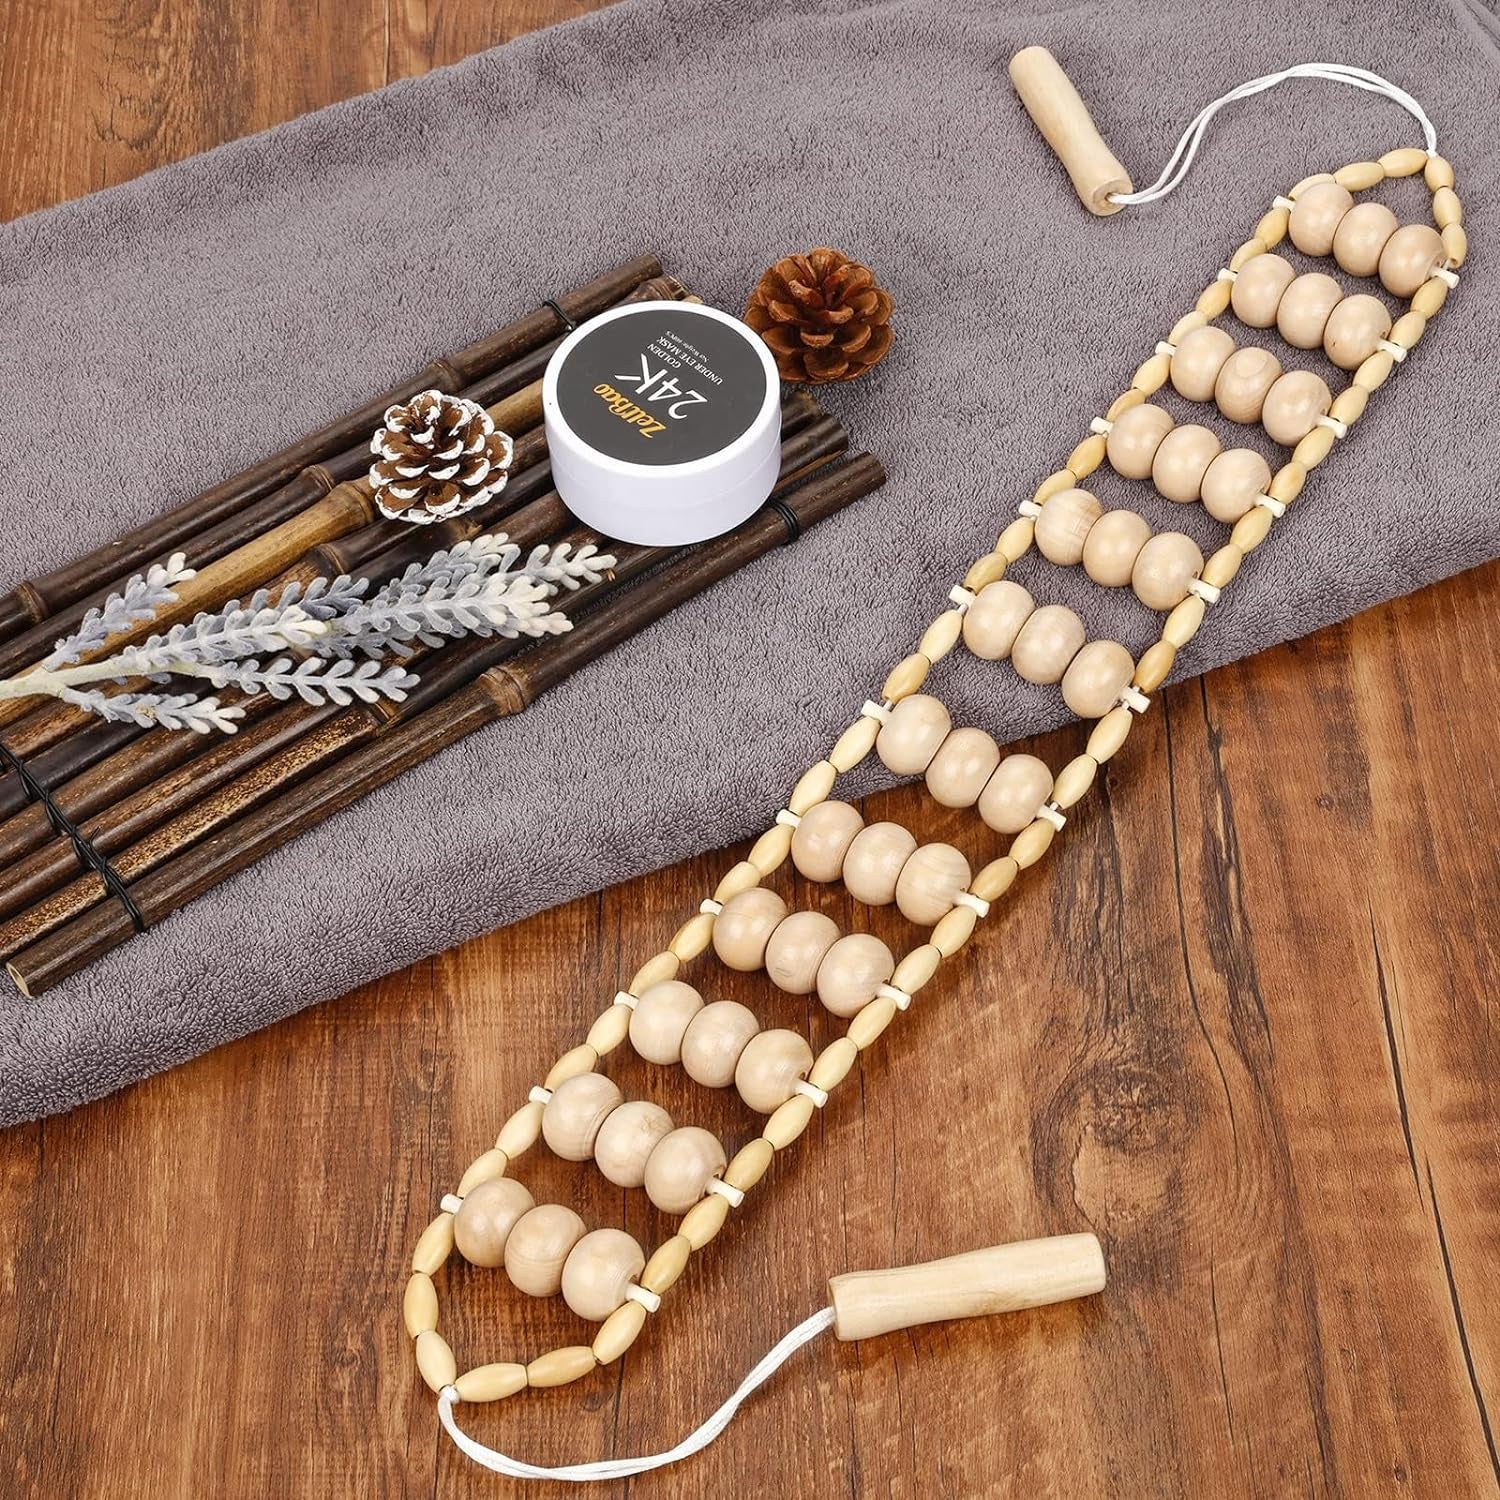 Wooden Massage Roller - Anti-Cellulite Tool for Pain Relief and Body Contouring